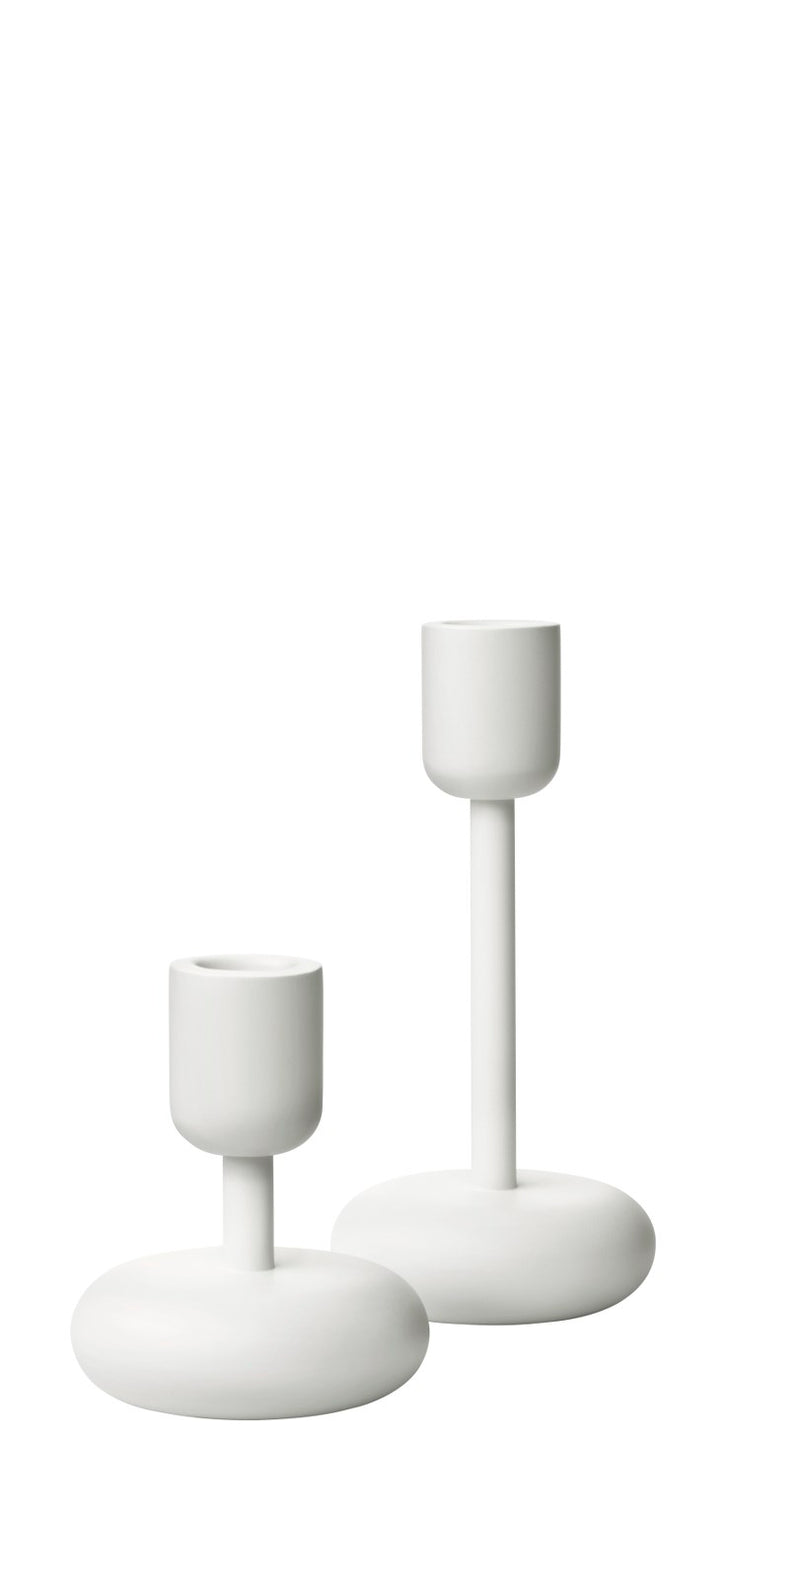 media image for Nappula Candleholder in Various Sizes & Colors design by Matti Klenell for Iittala 289